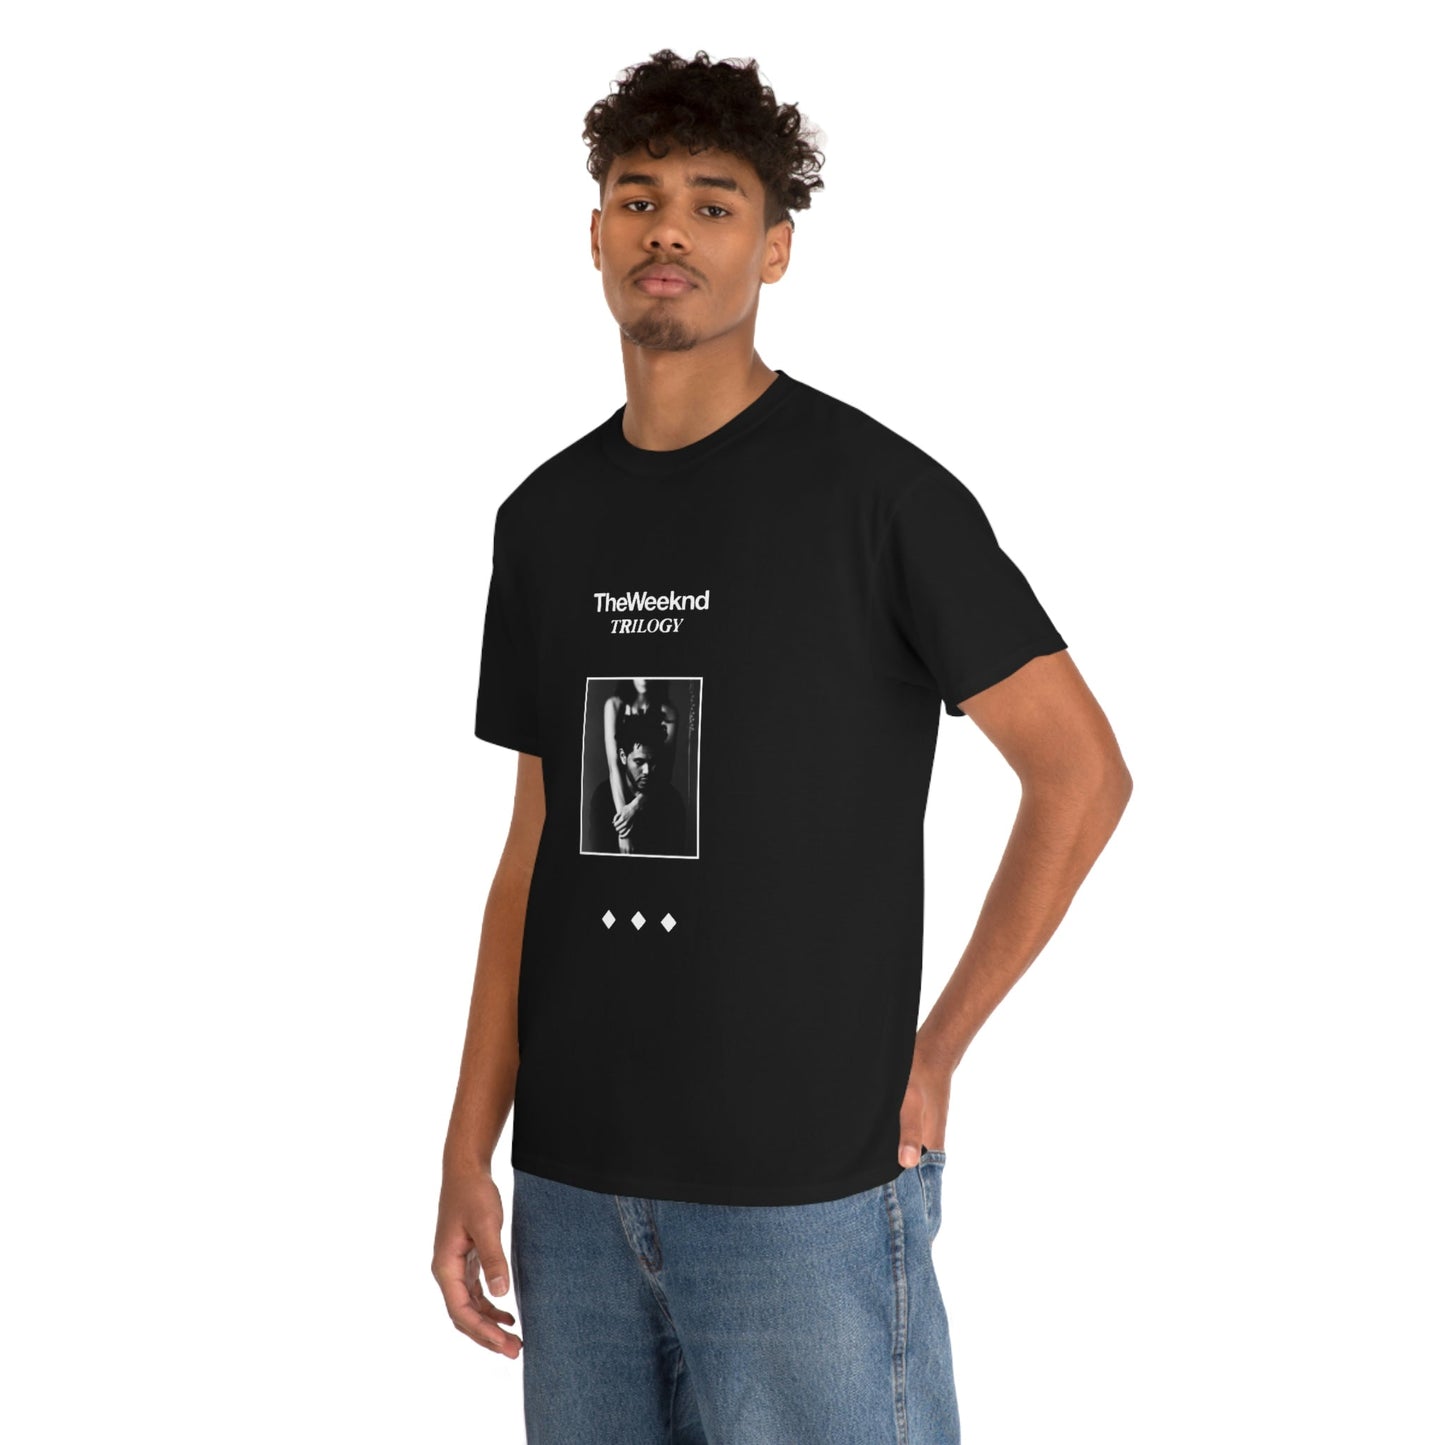 The Weeknd Trilogy Limited T-Shirt - RetroTeeShop